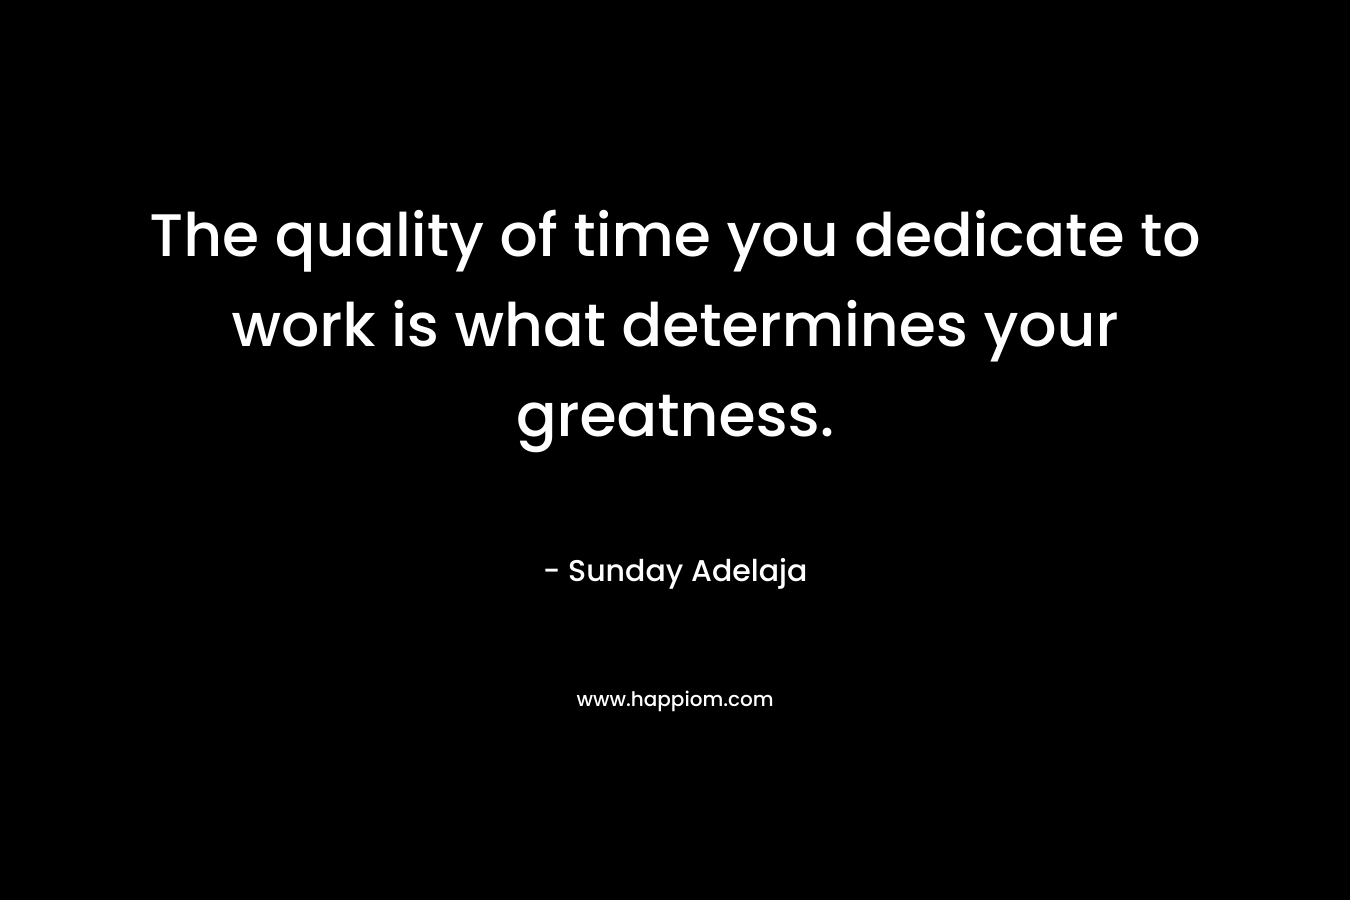 The quality of time you dedicate to work is what determines your greatness. – Sunday Adelaja